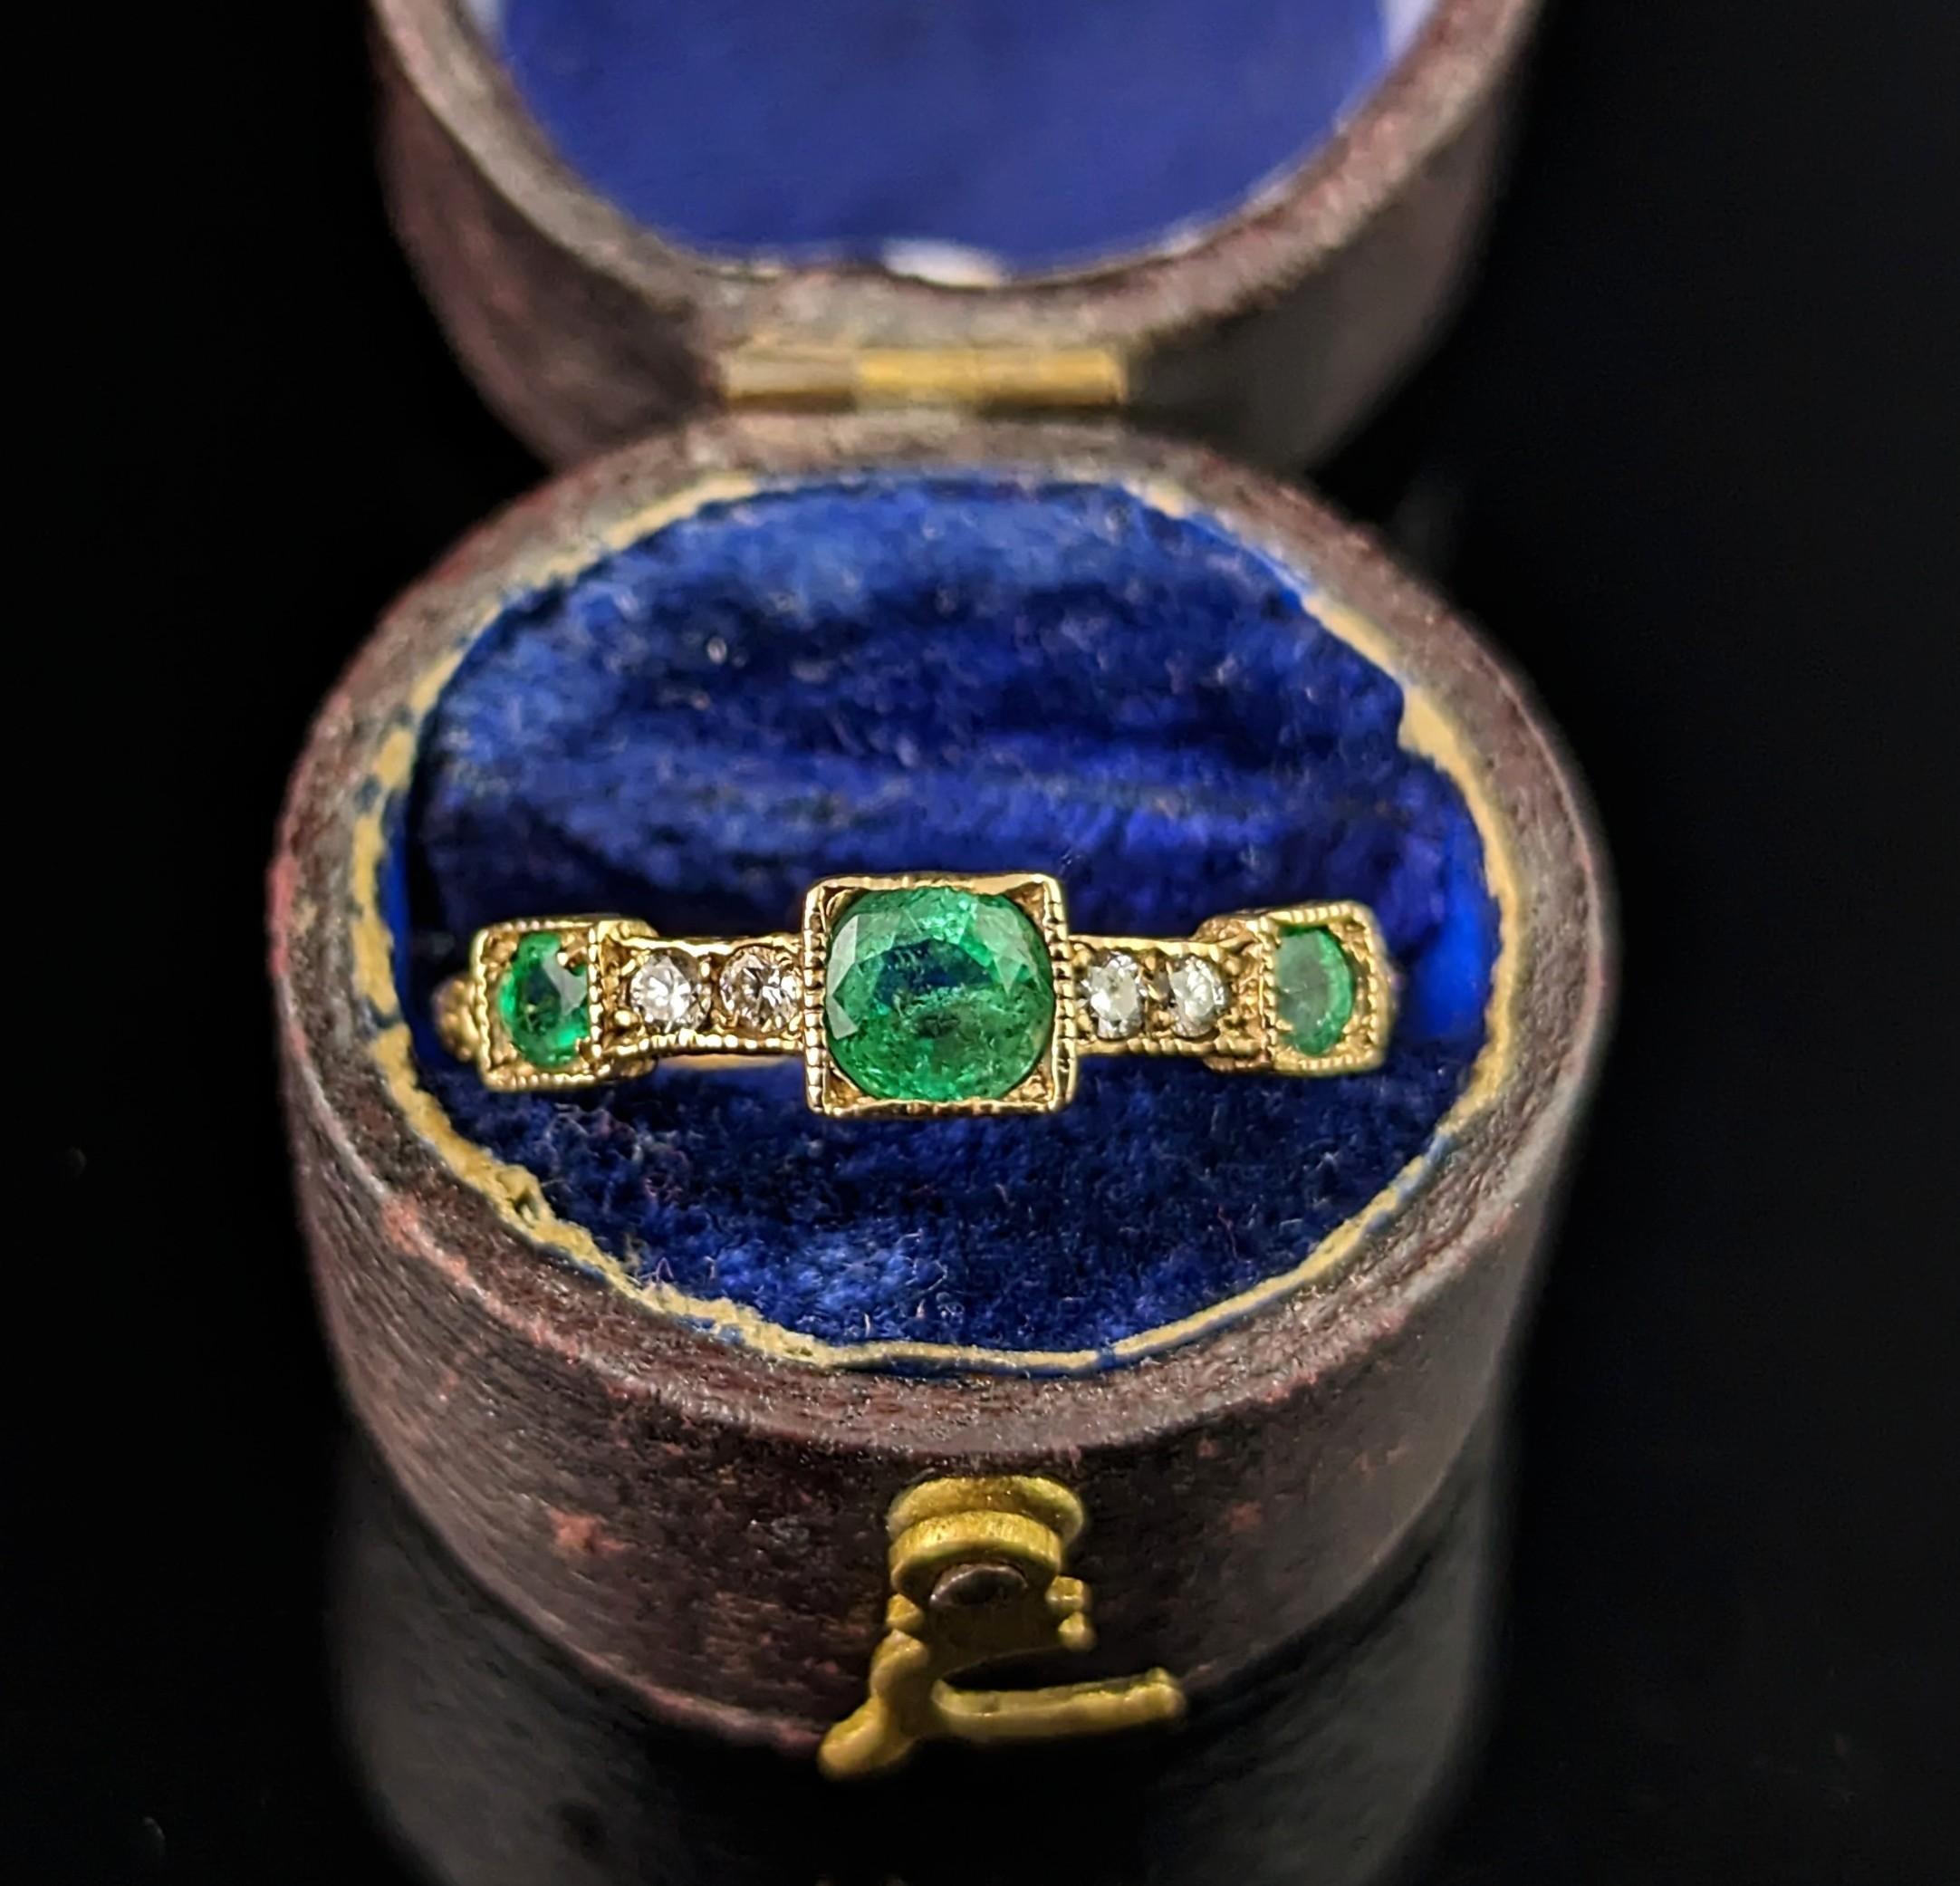 Such a beautiful antique Emerald and Diamond ring!

This one absolutely shines with rich character and wonderfully intense colours that work so well together to truly bring everything together in a delicate yet regal way.

It is crafted in rich 15ct